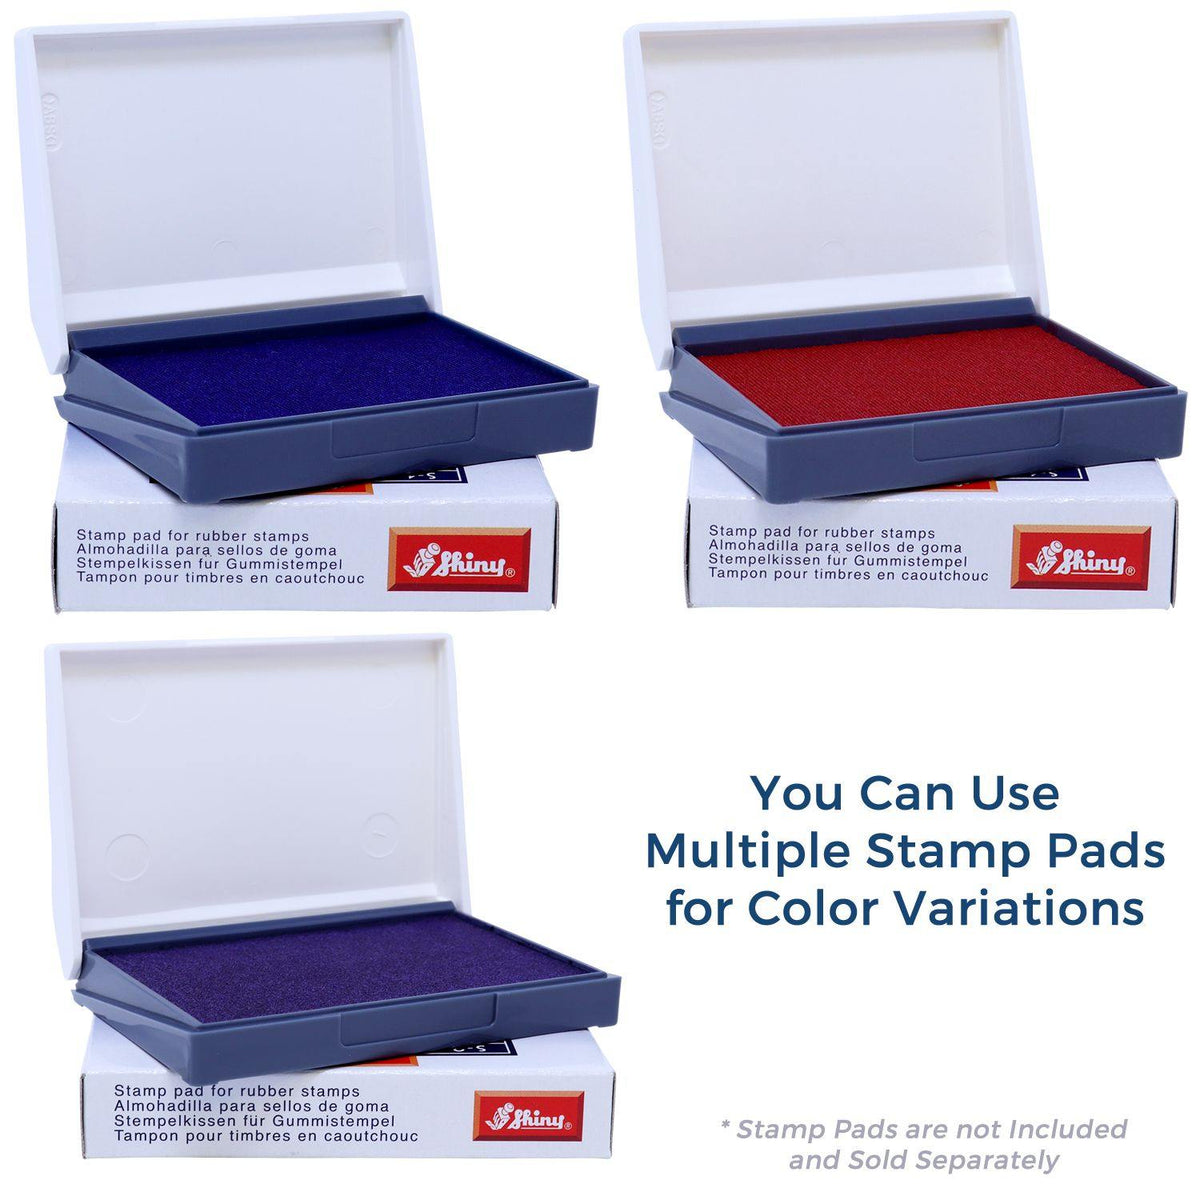 Stamp Pads for Classified Rubber Stamp Available